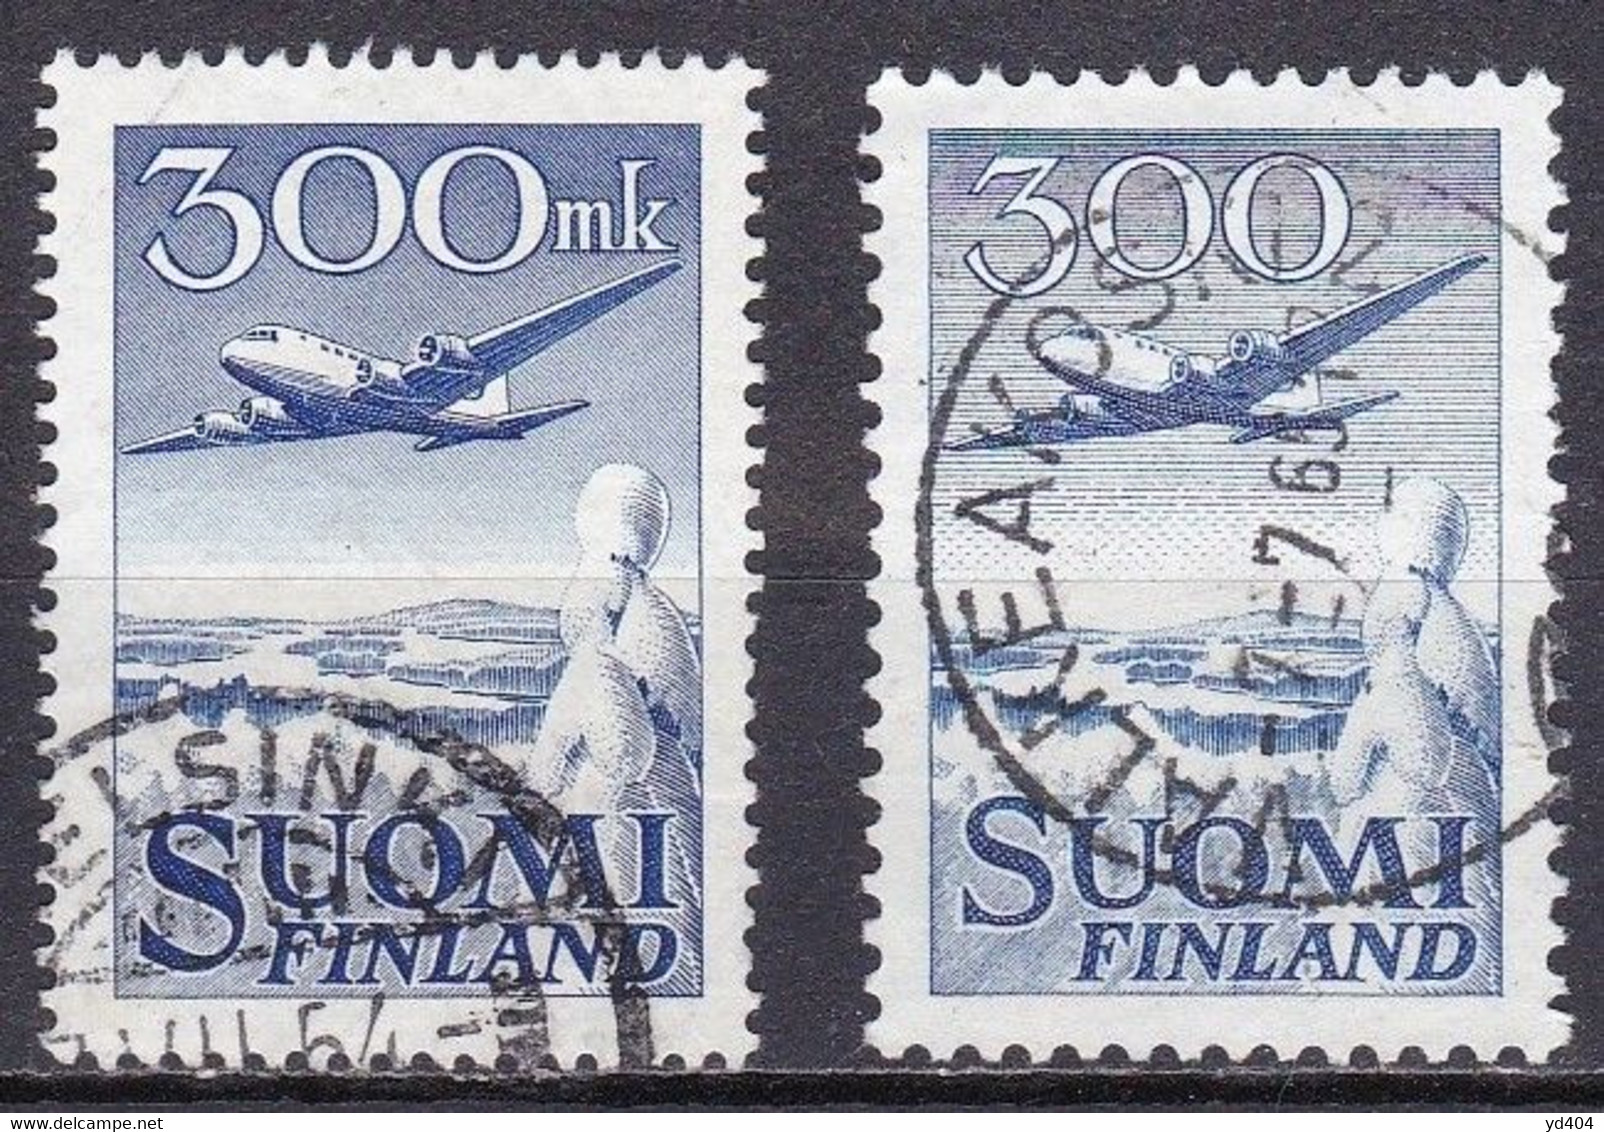 FI332 – FINLAND – AIRMAIL – 1950-58 - USED ISSUES – Y&T # 3/4 - CV 15,30 € - Used Stamps